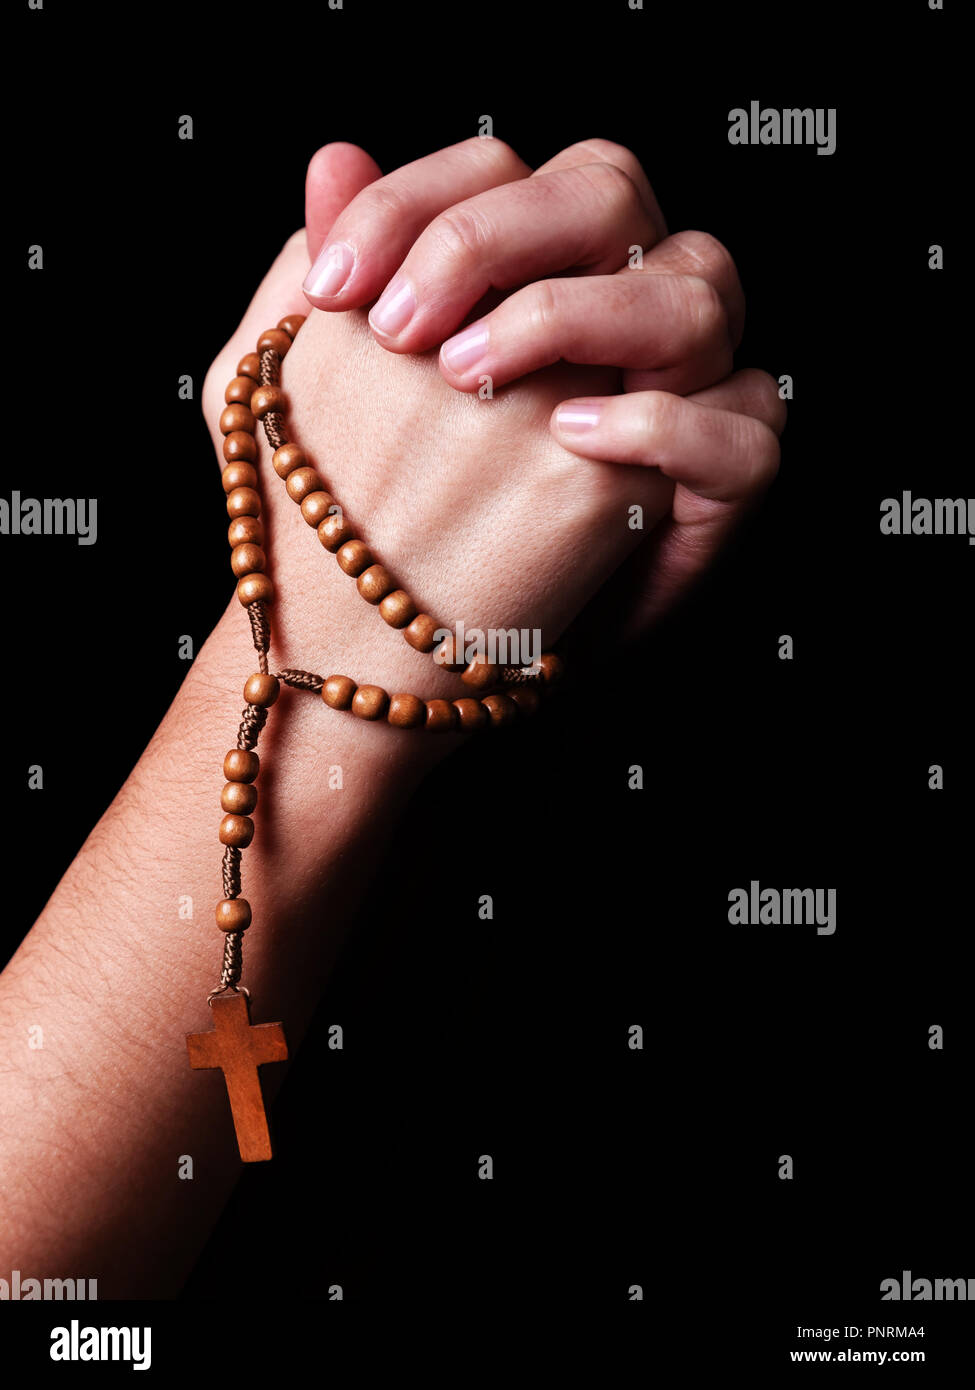 Female hands praying holding a beads rosary with a cross or Crucifix on black background. Woman with Christian Catholic religious faith. Profile or si Stock Photo